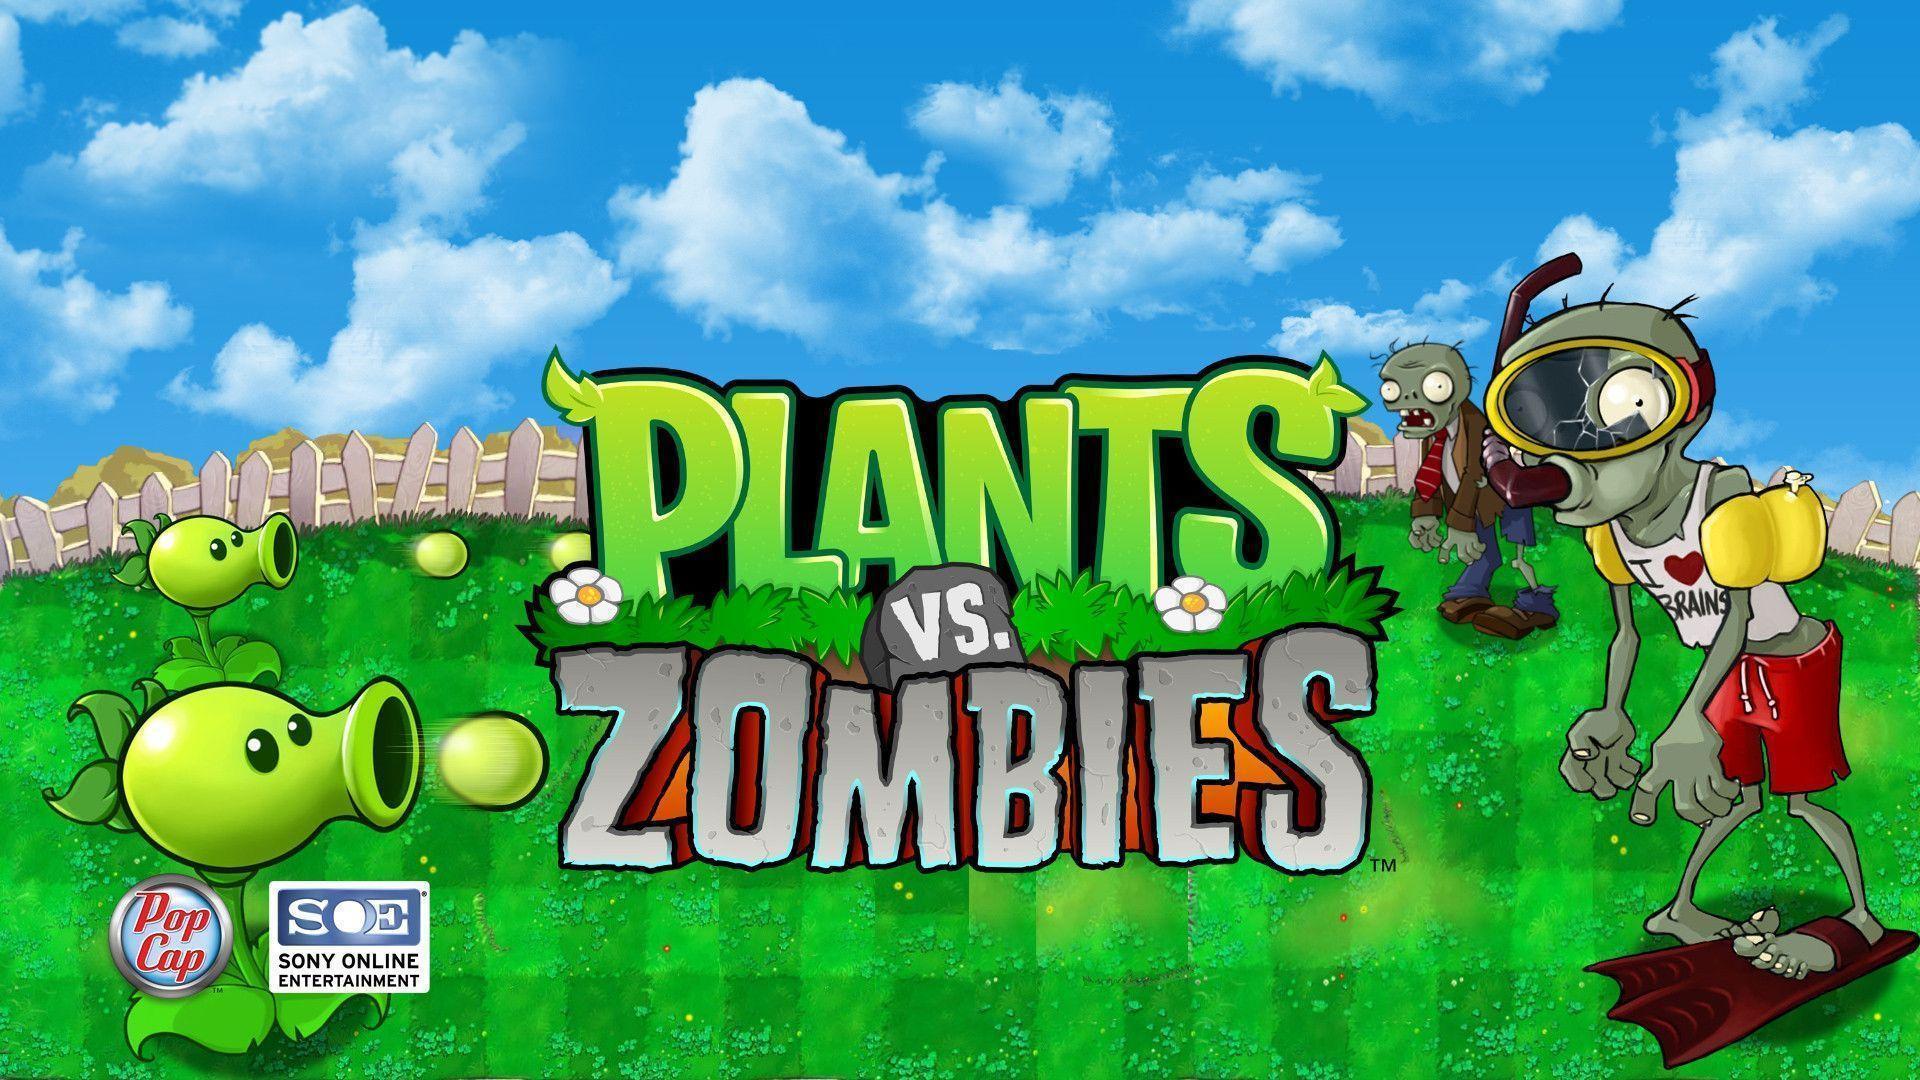 Of The Best Plants vs Zombies Wallpapers